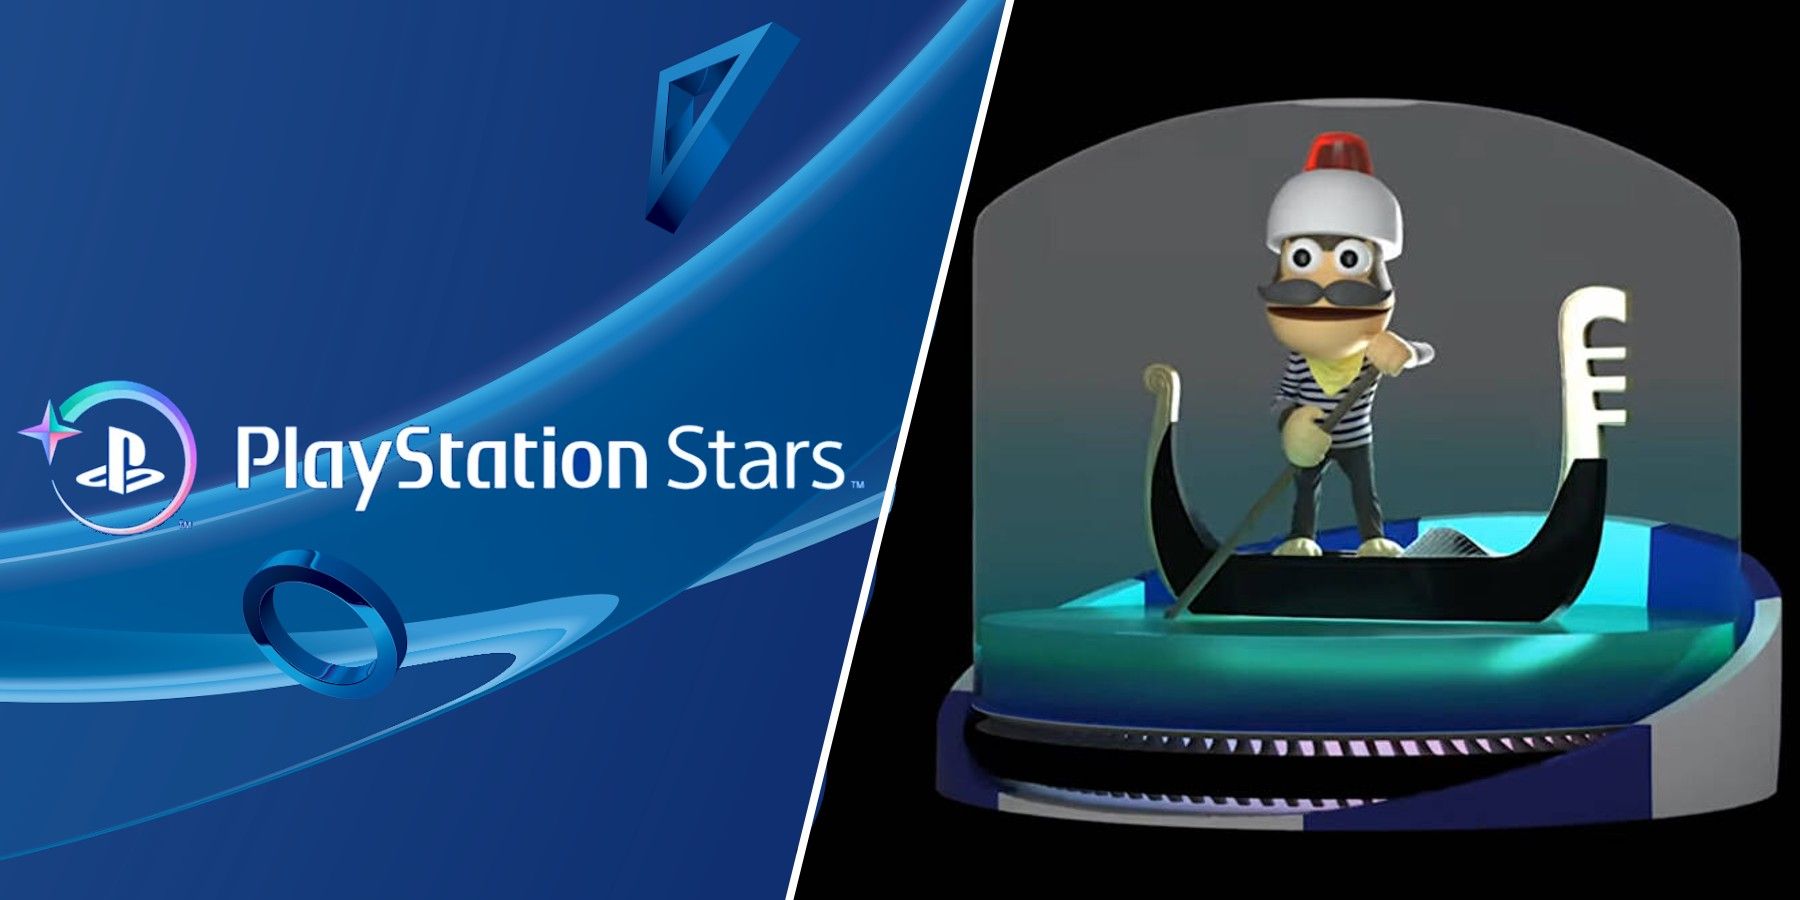 Sony Wants You to Know PlayStation Stars is Not Dealing in NFTs